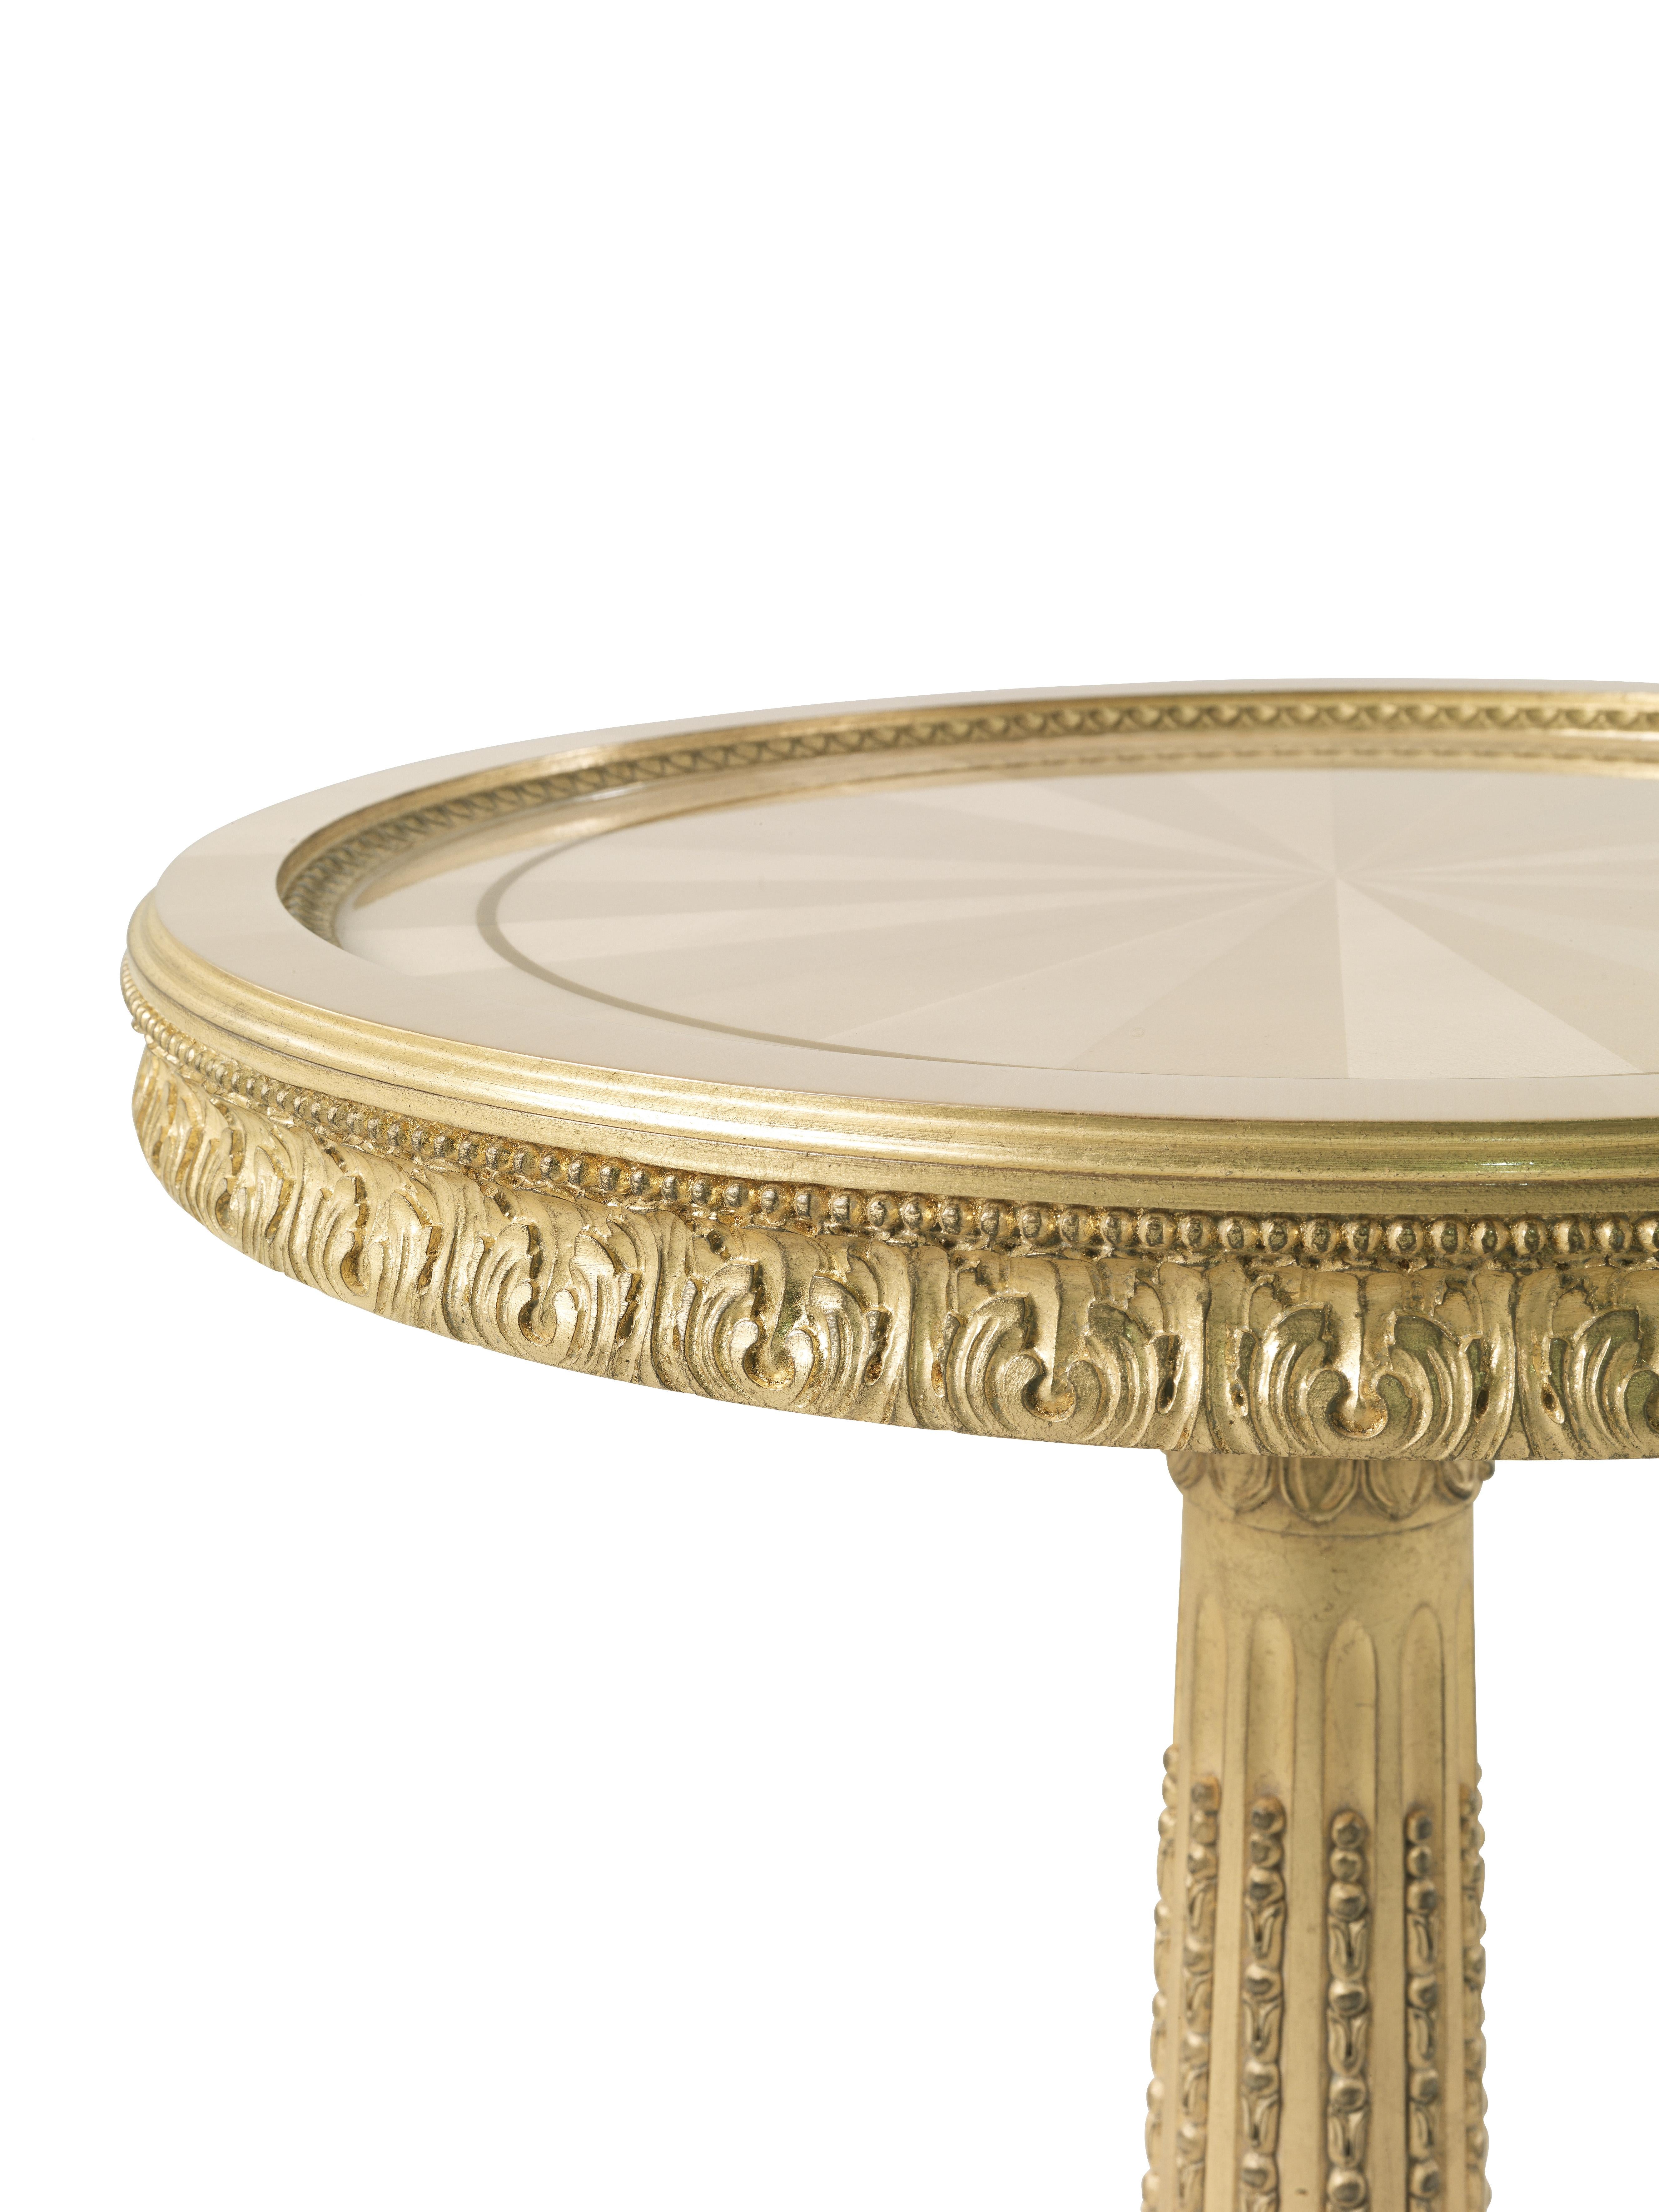 Louis XVI 21st Century Boulevard Side Table in Wood with Hand-carved Details For Sale